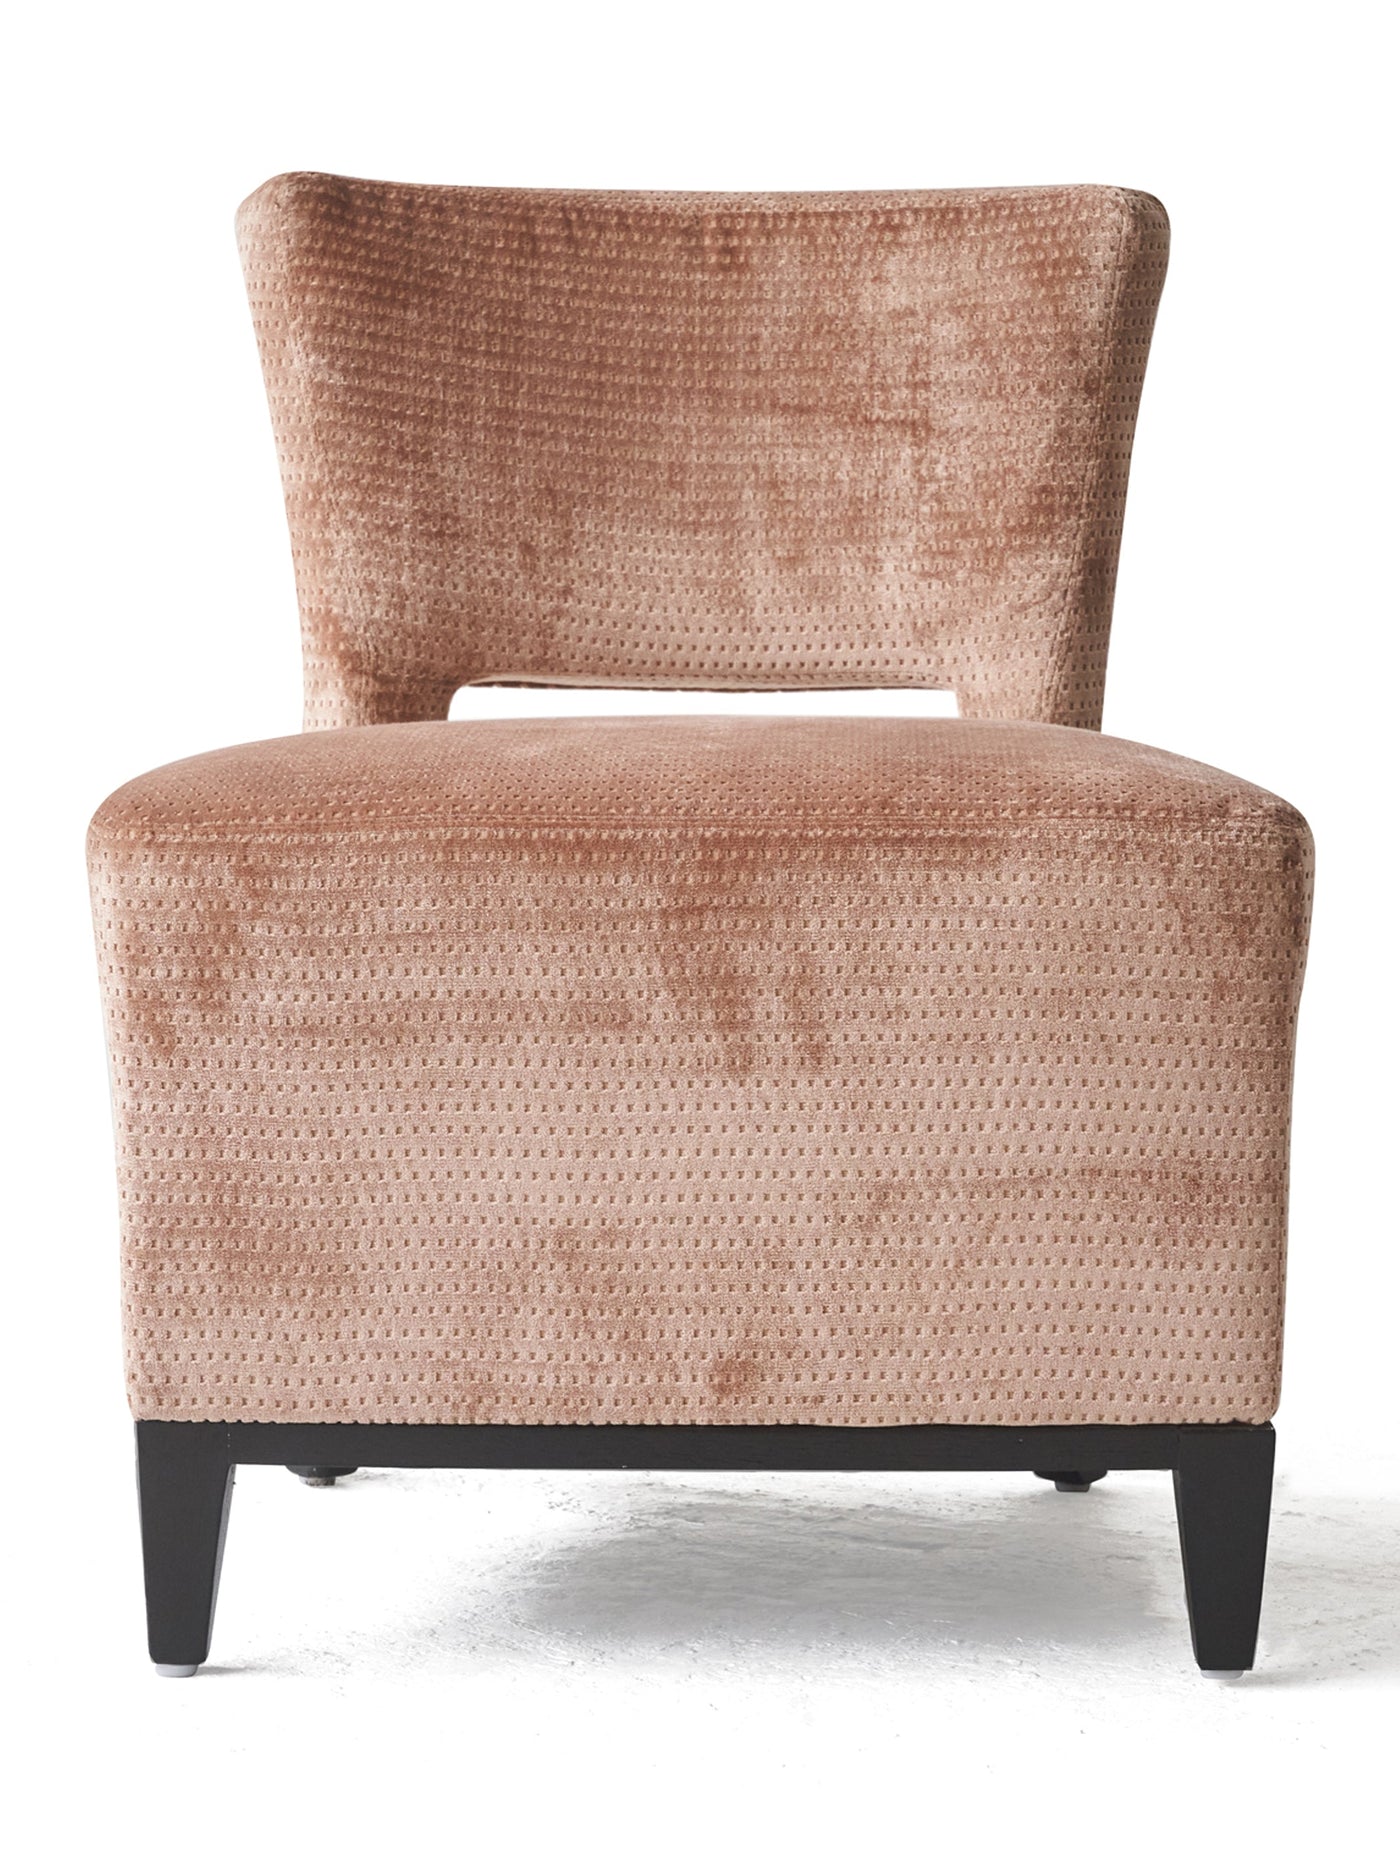 Pair of Low Chairs in Blush Velvet from The Upper House